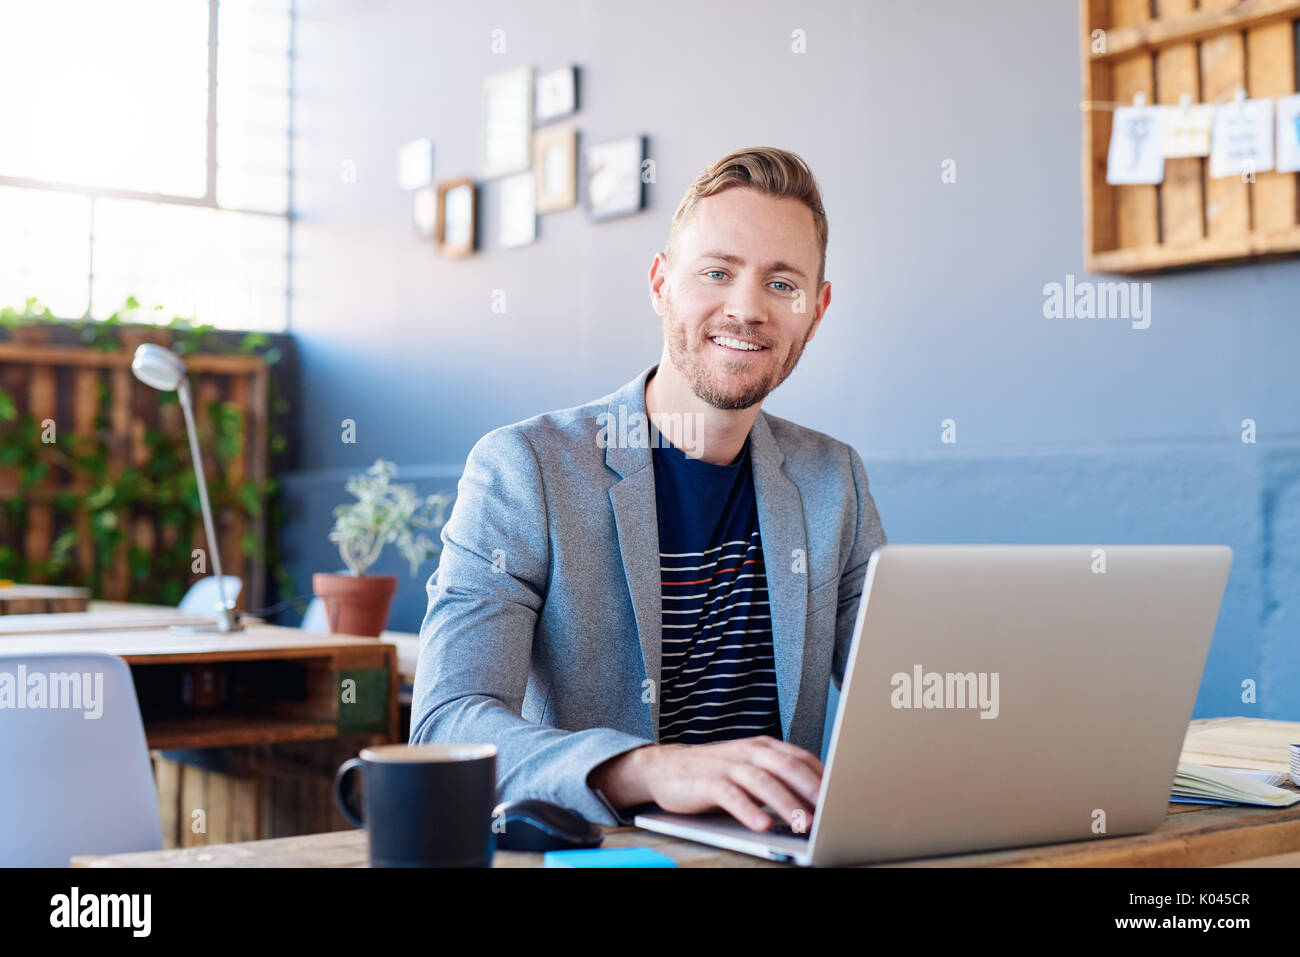 Smiling young businessman working on a laptop in an office Stock Photo